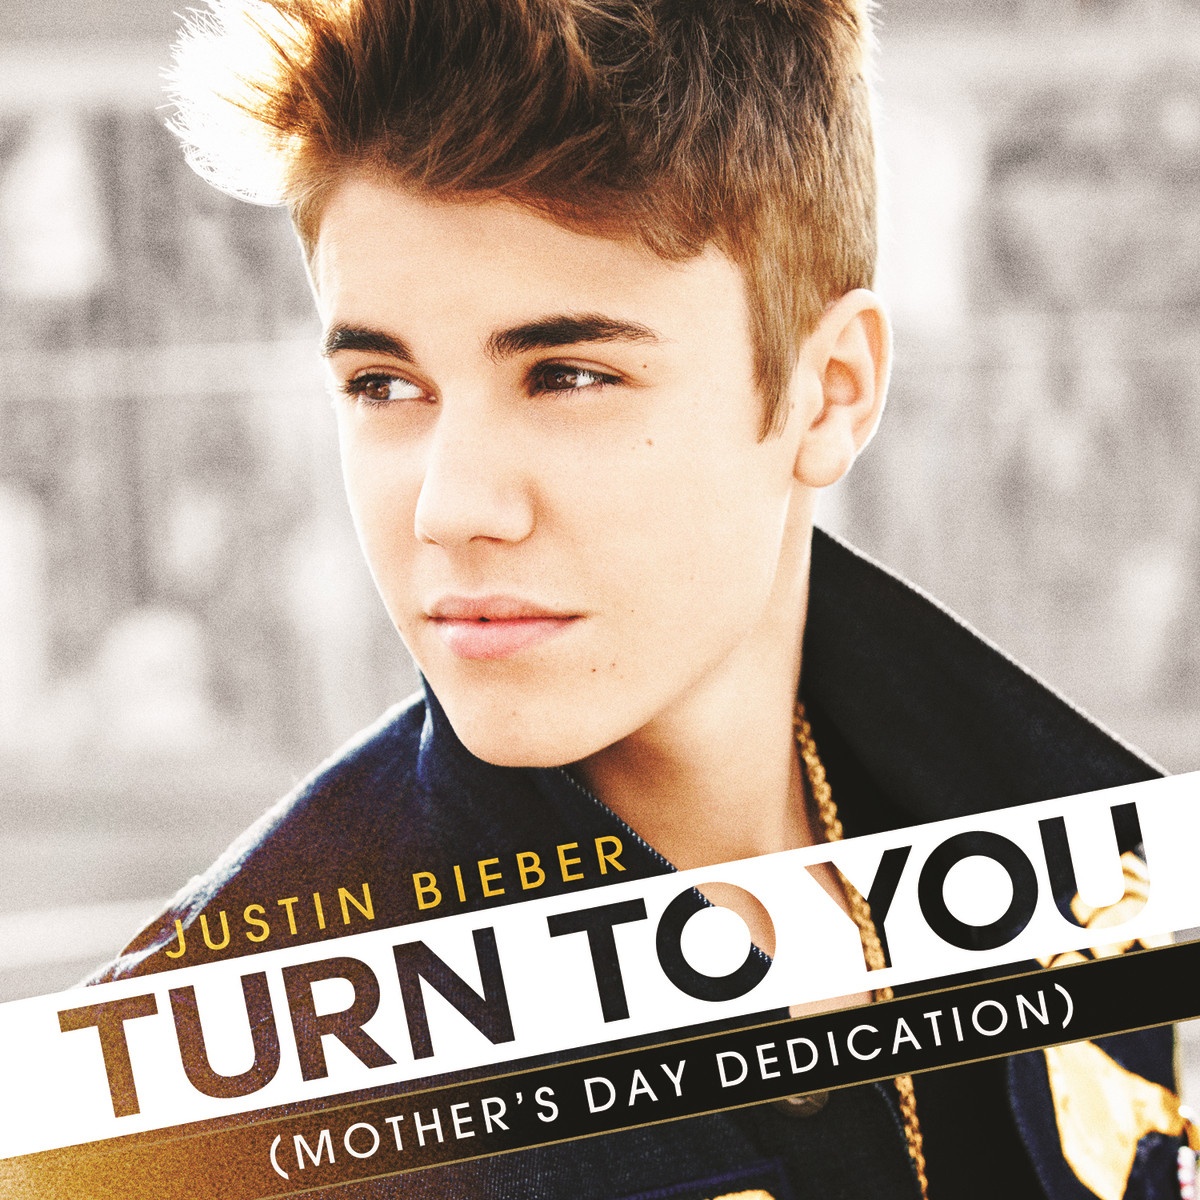 Turn To You - Mother's Day Dedication